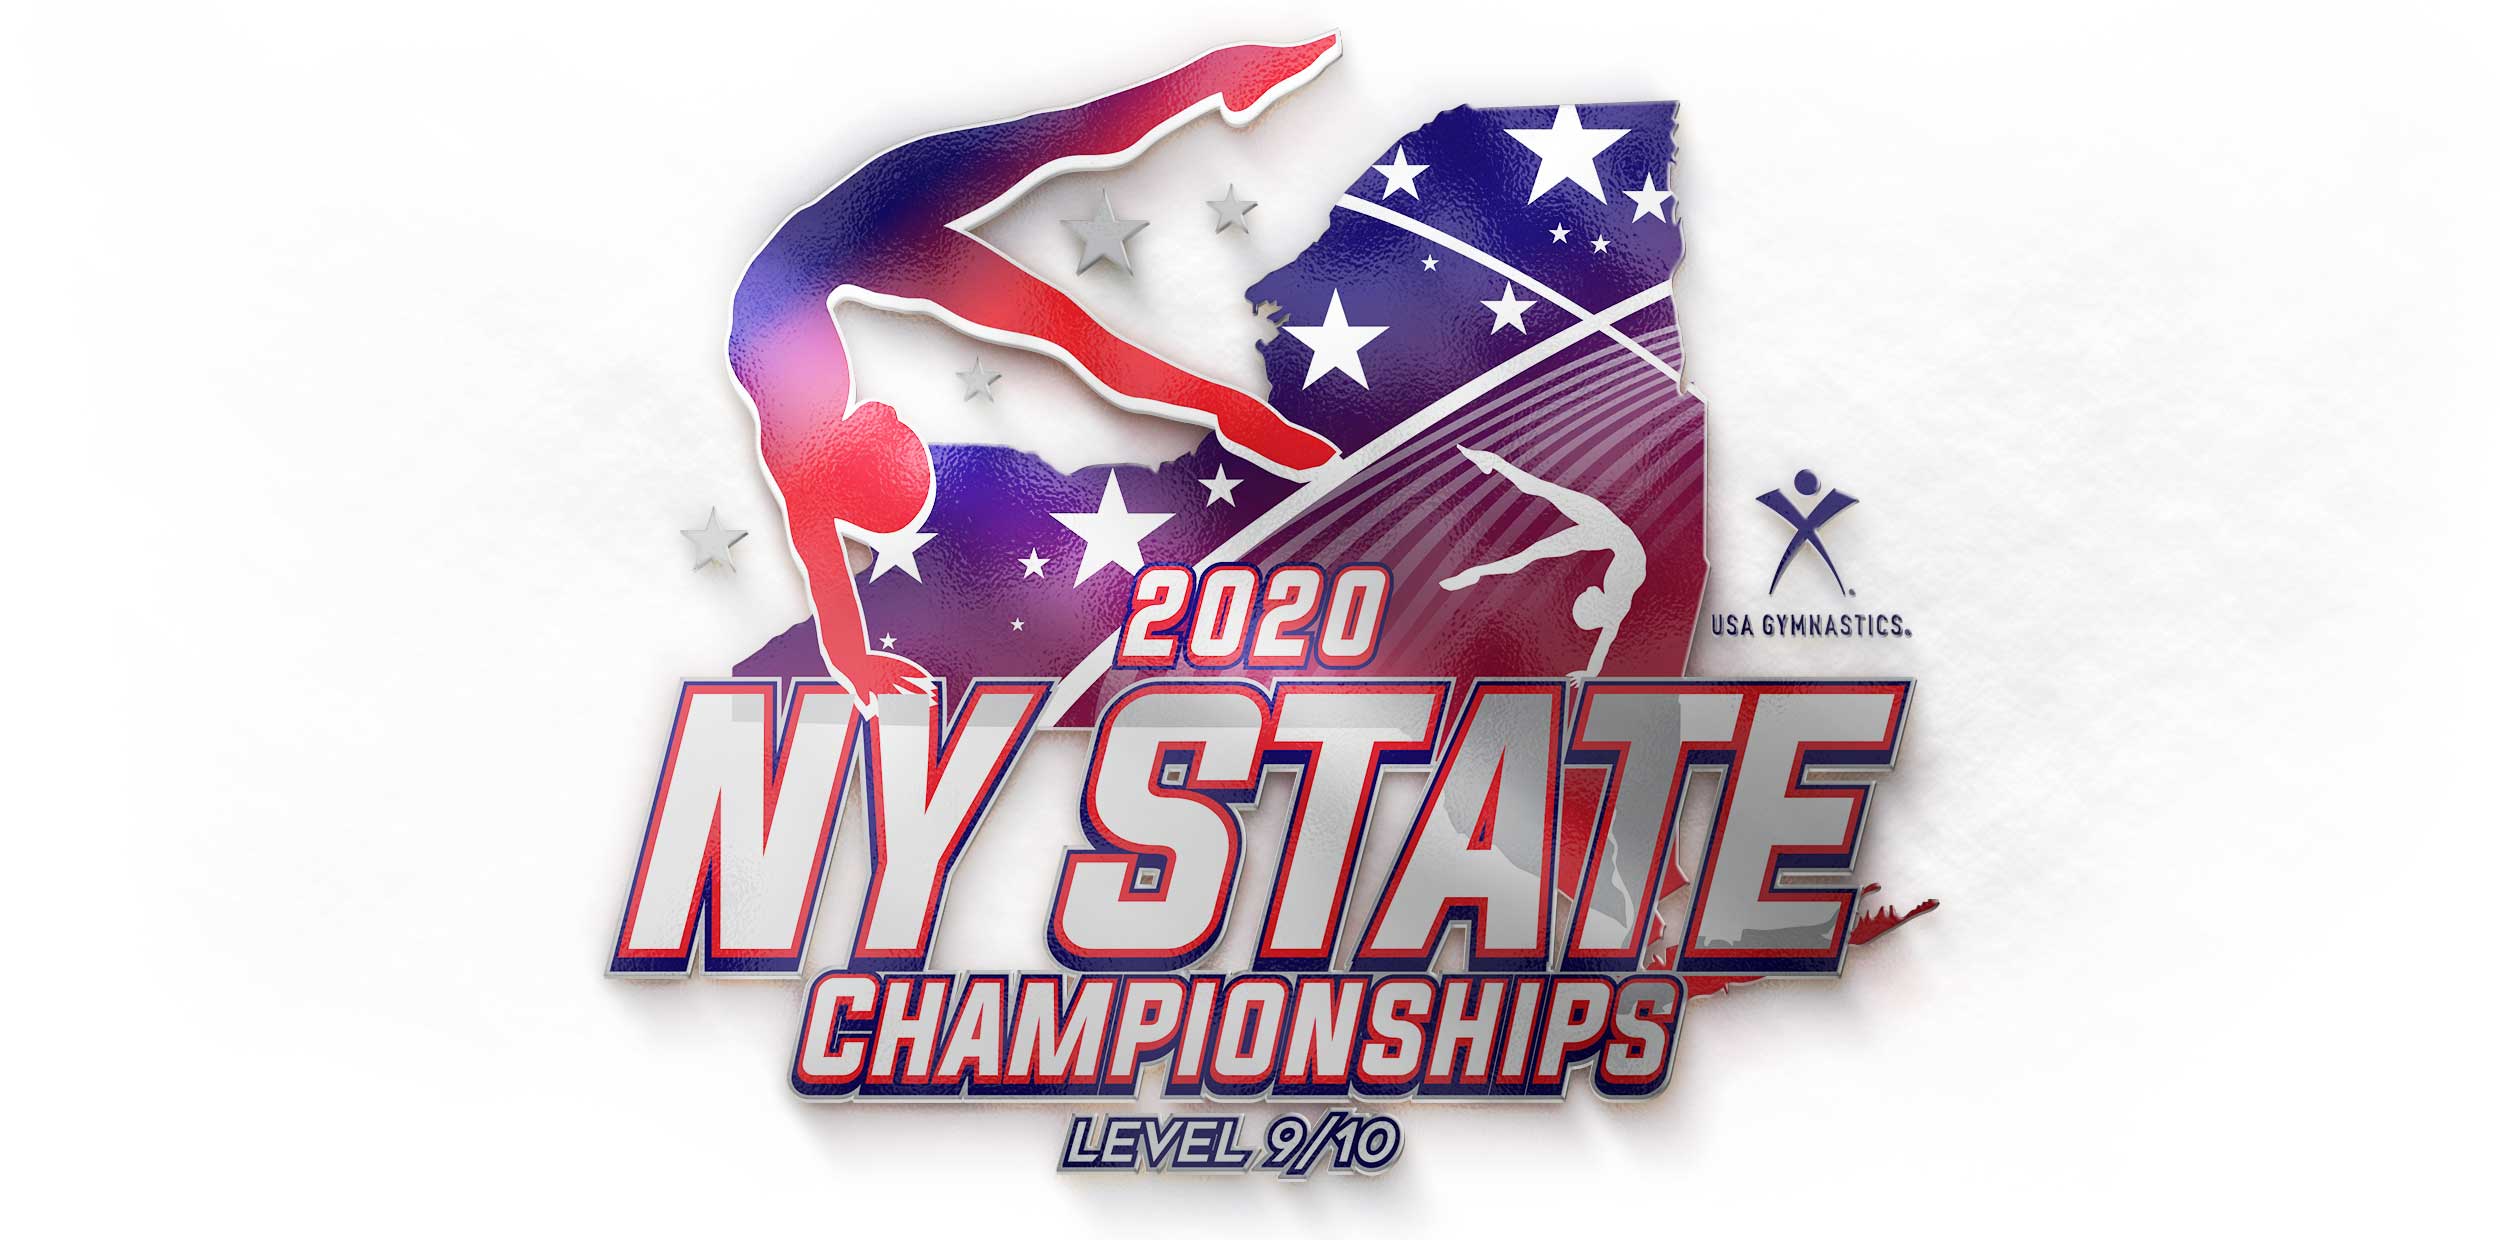 Fine-Designs-Apparel-NY-State-Chamionships